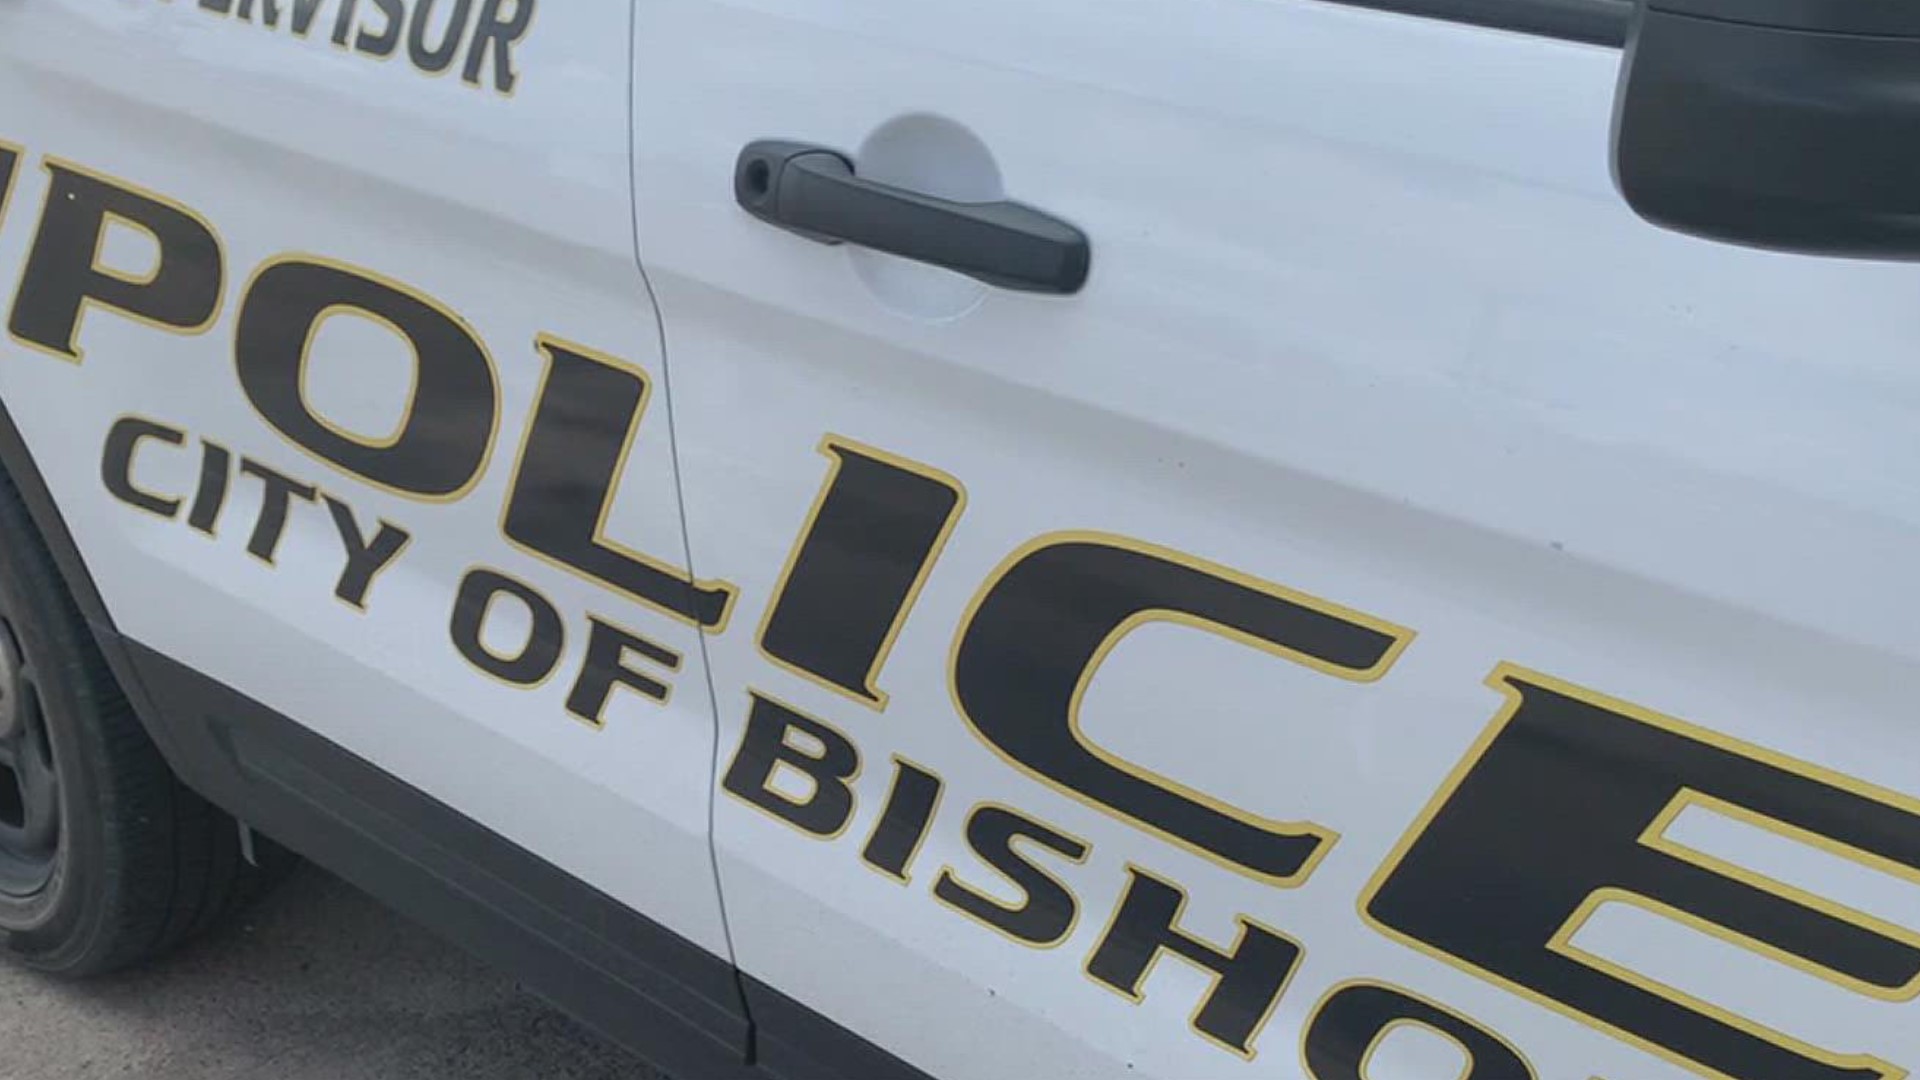 Bishop Police Chief Edward Day believes that the deal is going to help give his department a better chance at getting drug dealers off the streets.